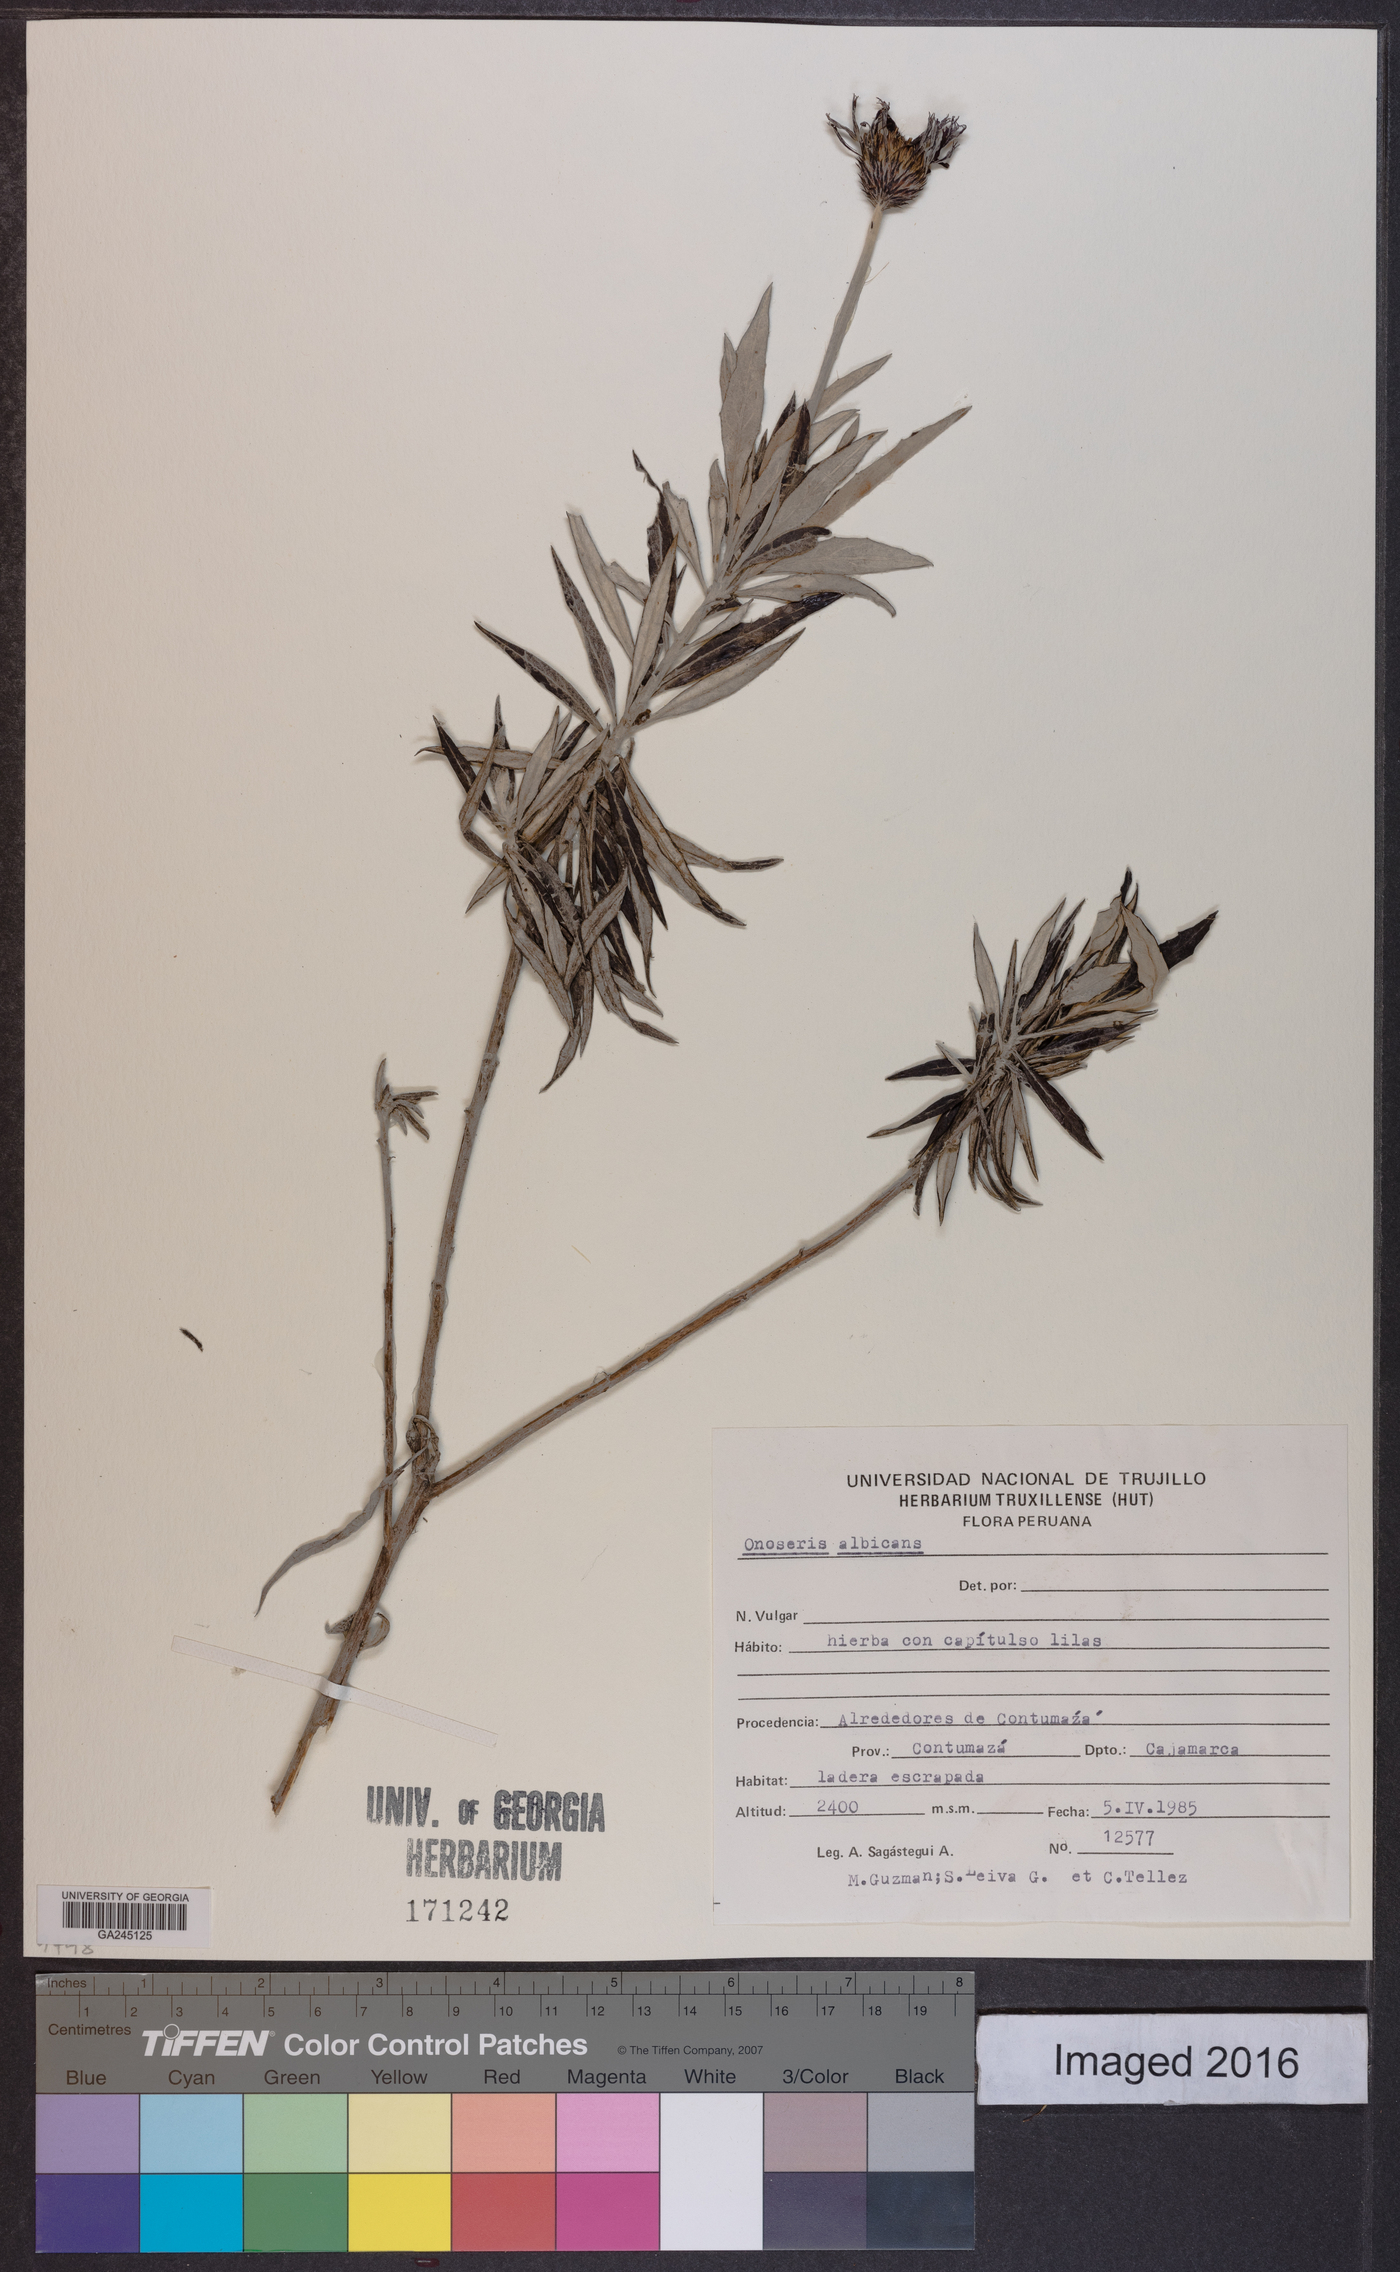 Onoseris albicans image